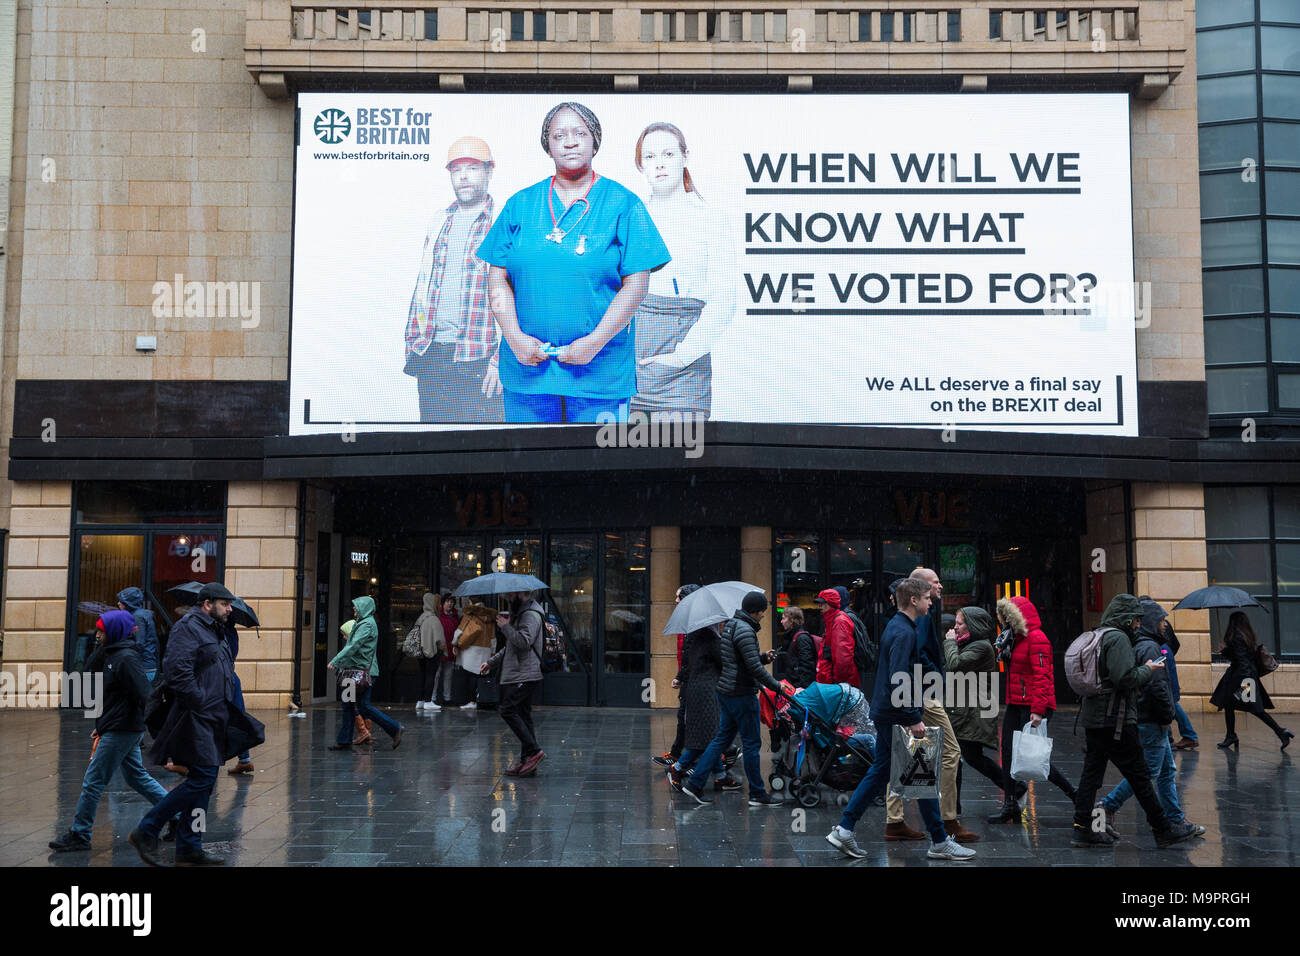 London, UK. 28th March, 2018. A large advertisement in Leicester Square forming part of a £500,000 nationwide campaign by Best for Britain demanding a referendum on the final Brexit deal. Credit: Mark Kerrison/Alamy Live News Stock Photo